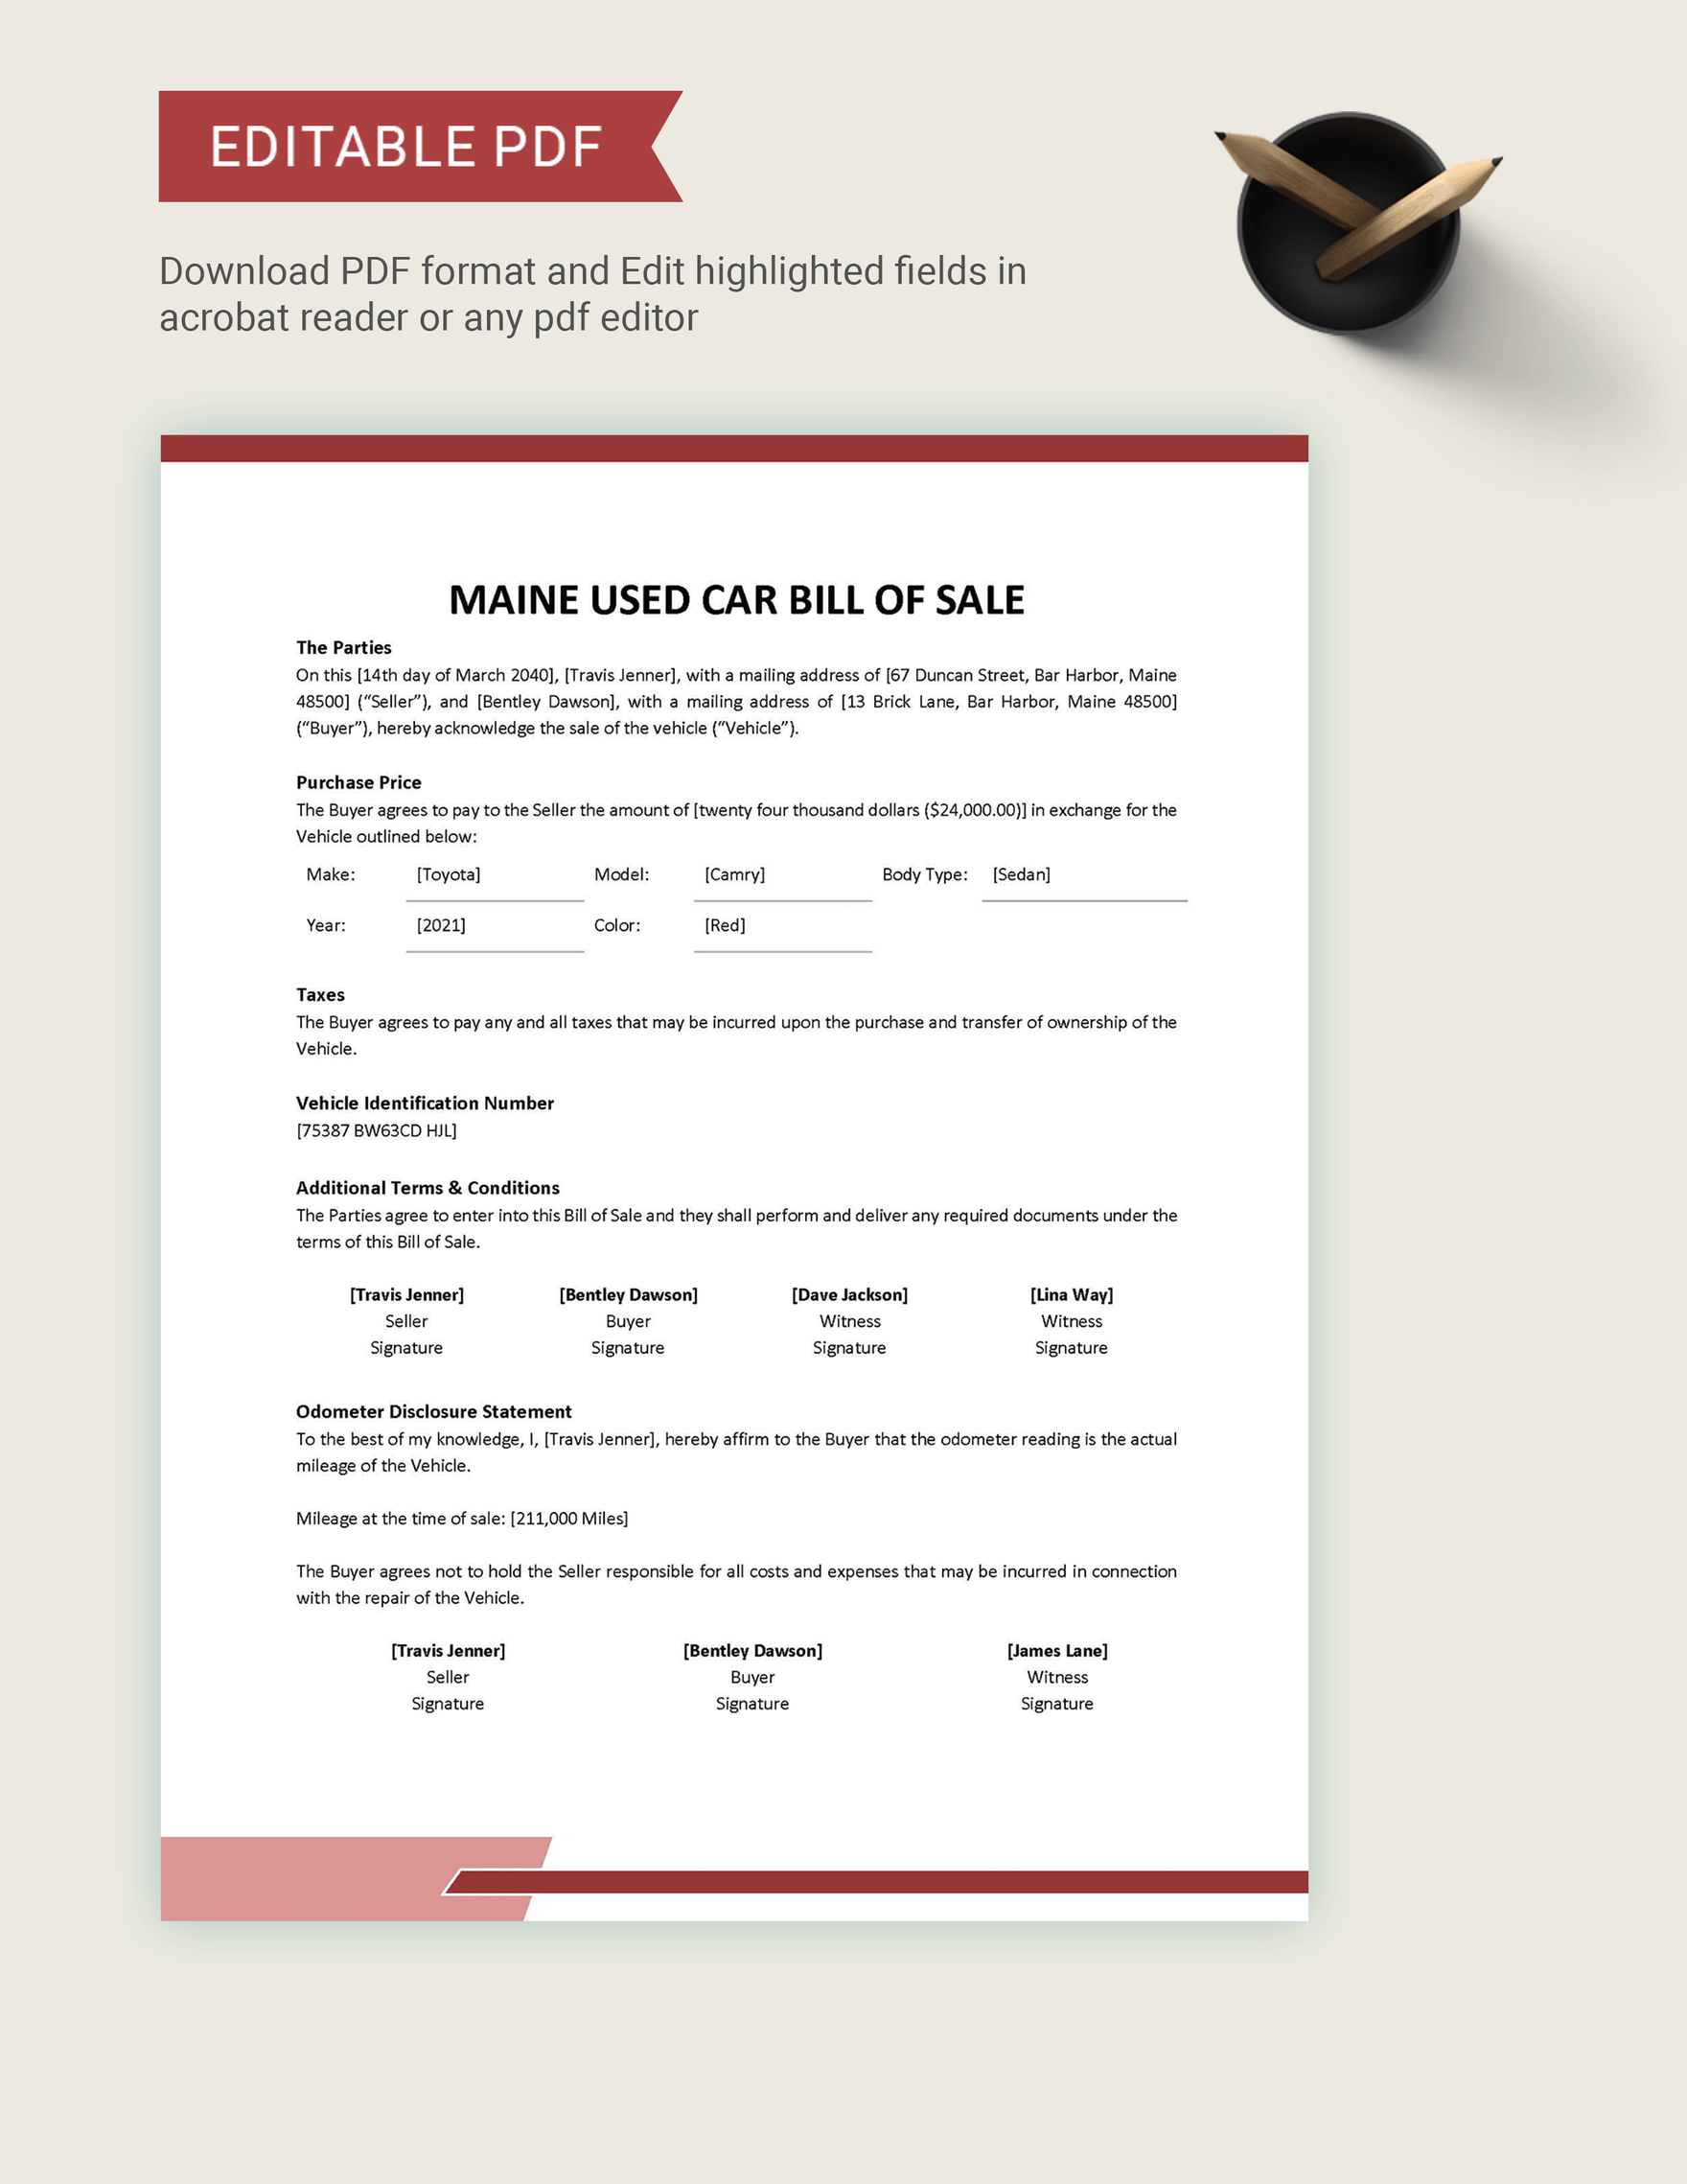 Maine Used Car Bill of Sale Template